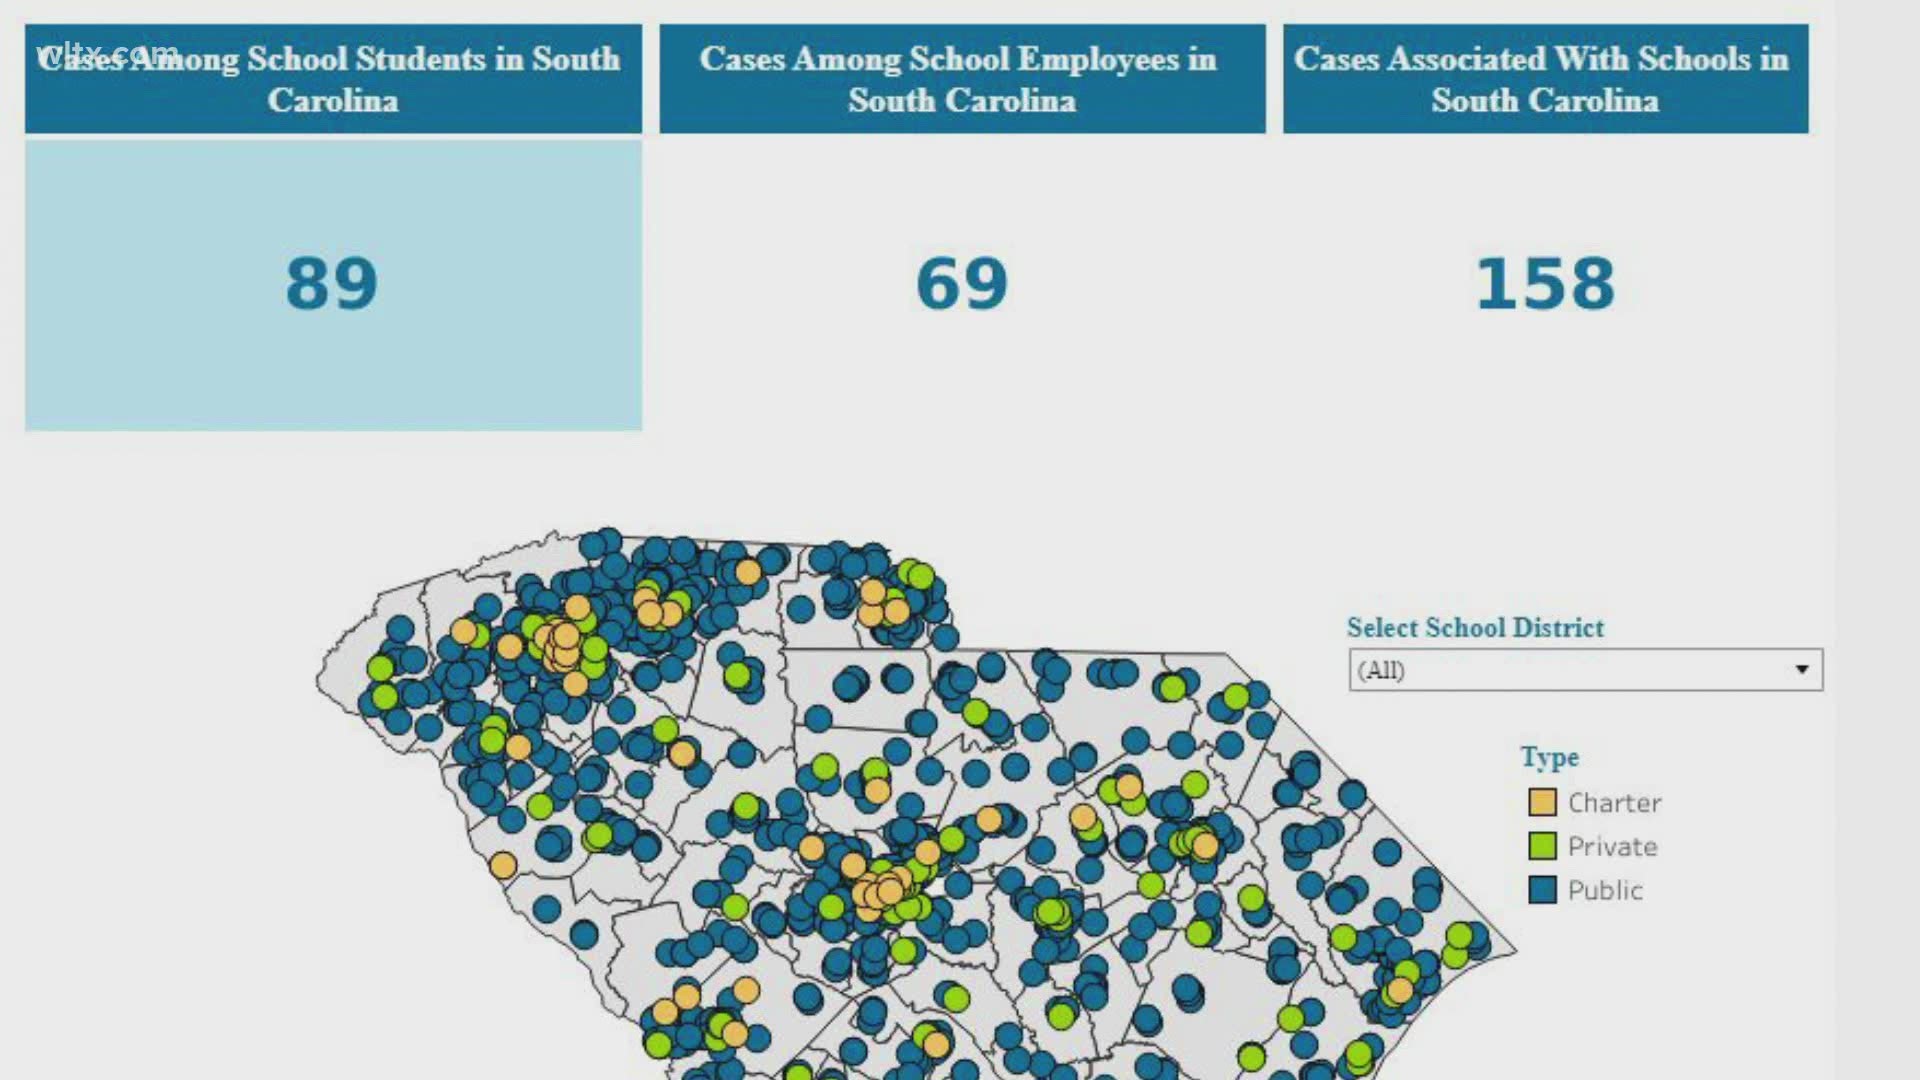 The numbers show a total of 158 cases statewide, with 89 of those involving students and 69 school employees.